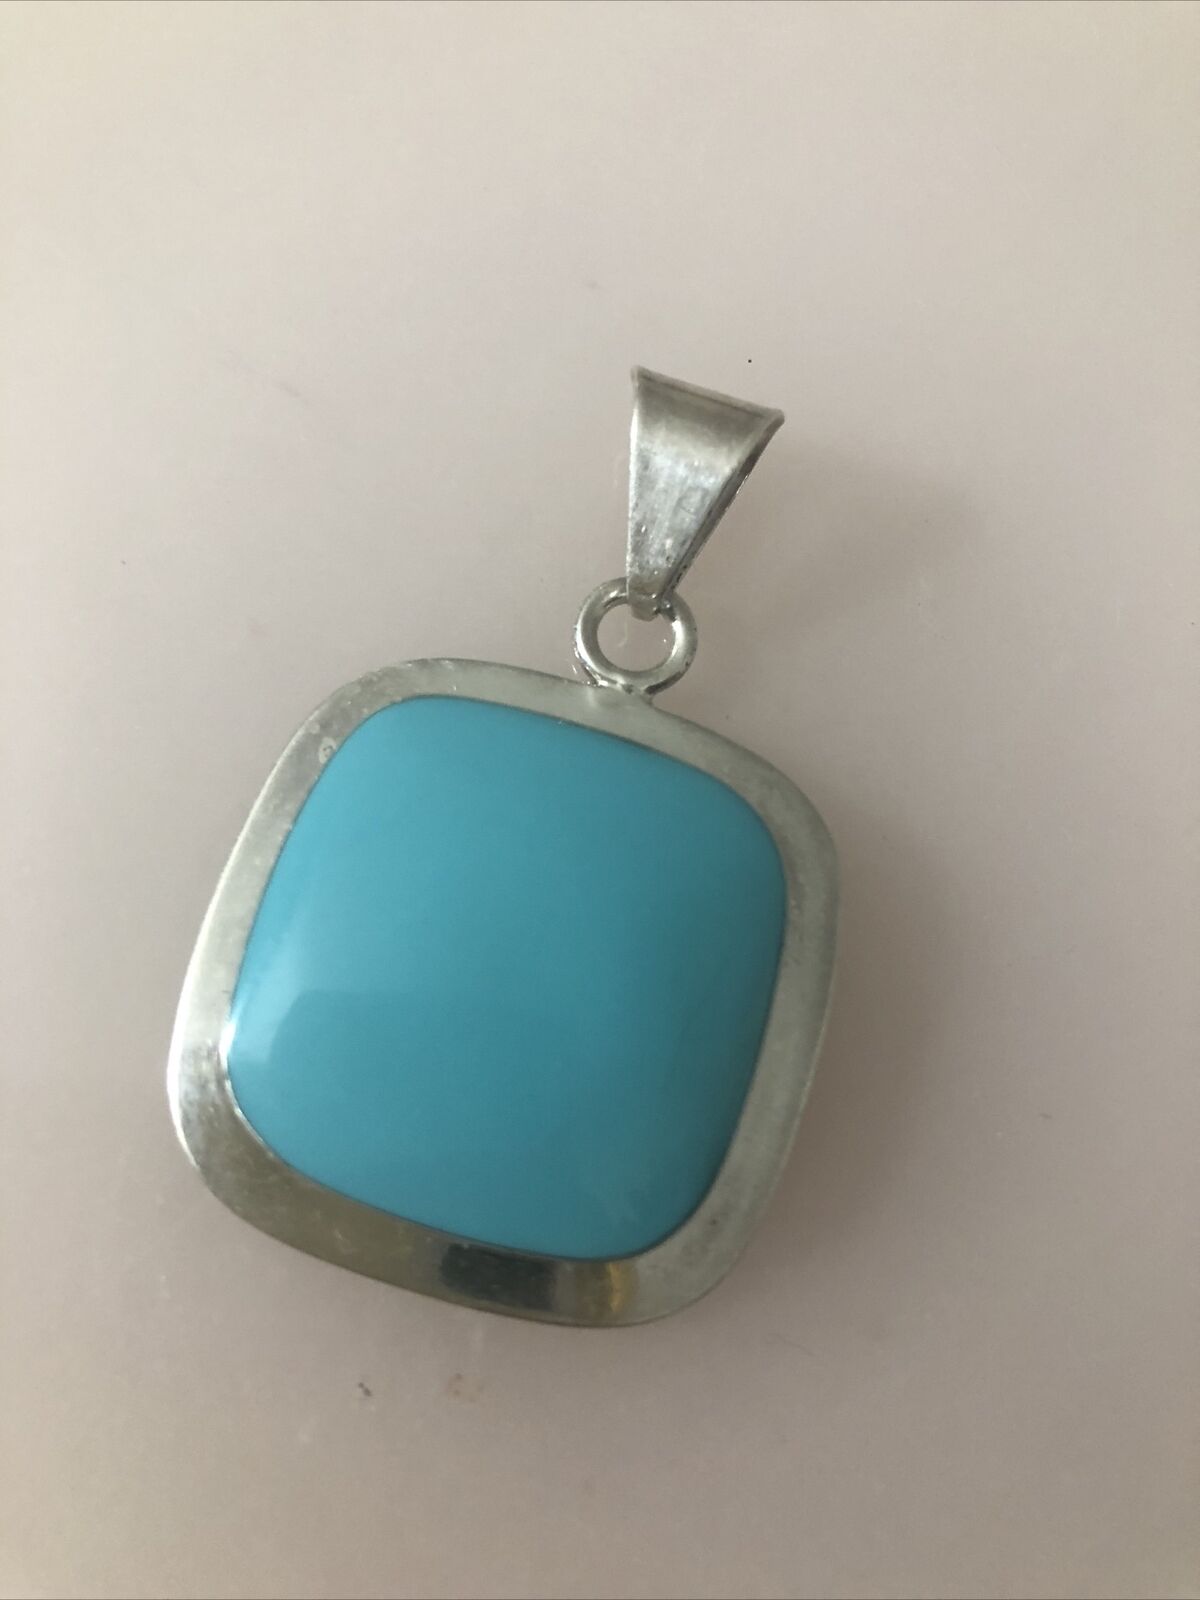 A Perfect Turquoise Sterling Silver Pendant Without any Flaws ATI Mexico 19.4g